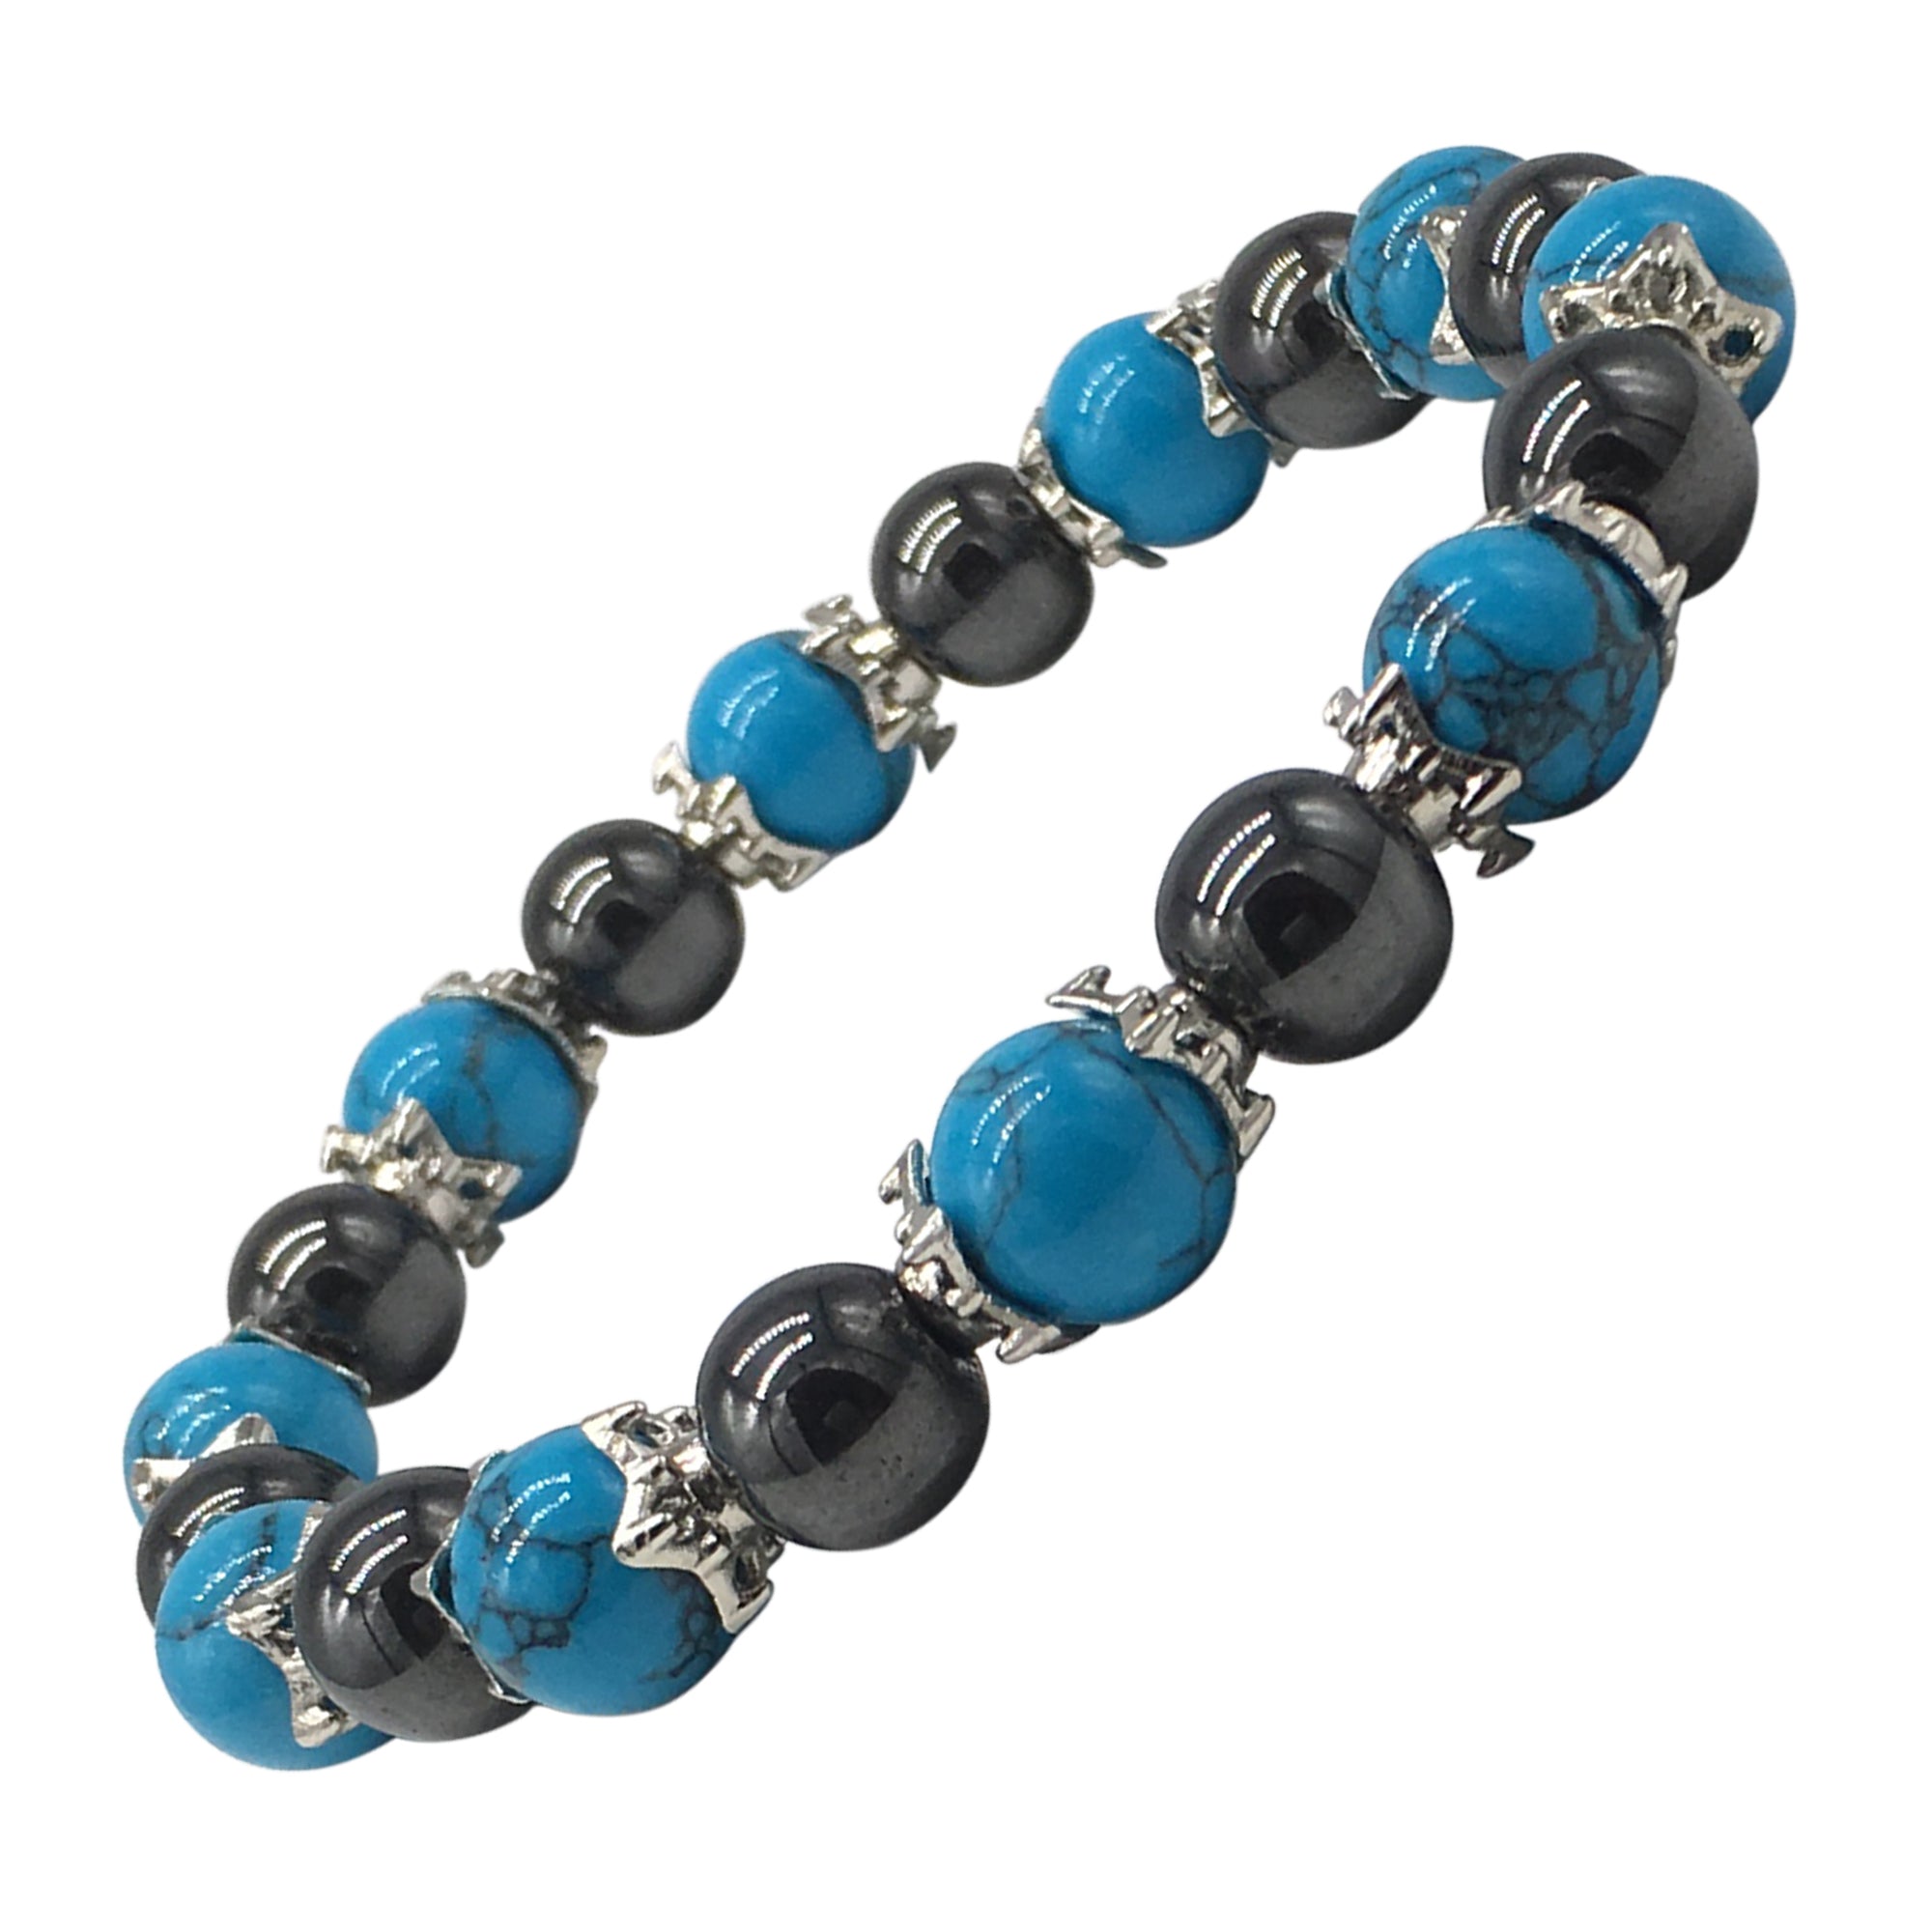 turquoise and hematite magnetic therapy bracelet for women natural pain relief for arthritis joint pain carpal tunnel relief menopause symptoms hot flushes best gift for women and ladies plus gift box